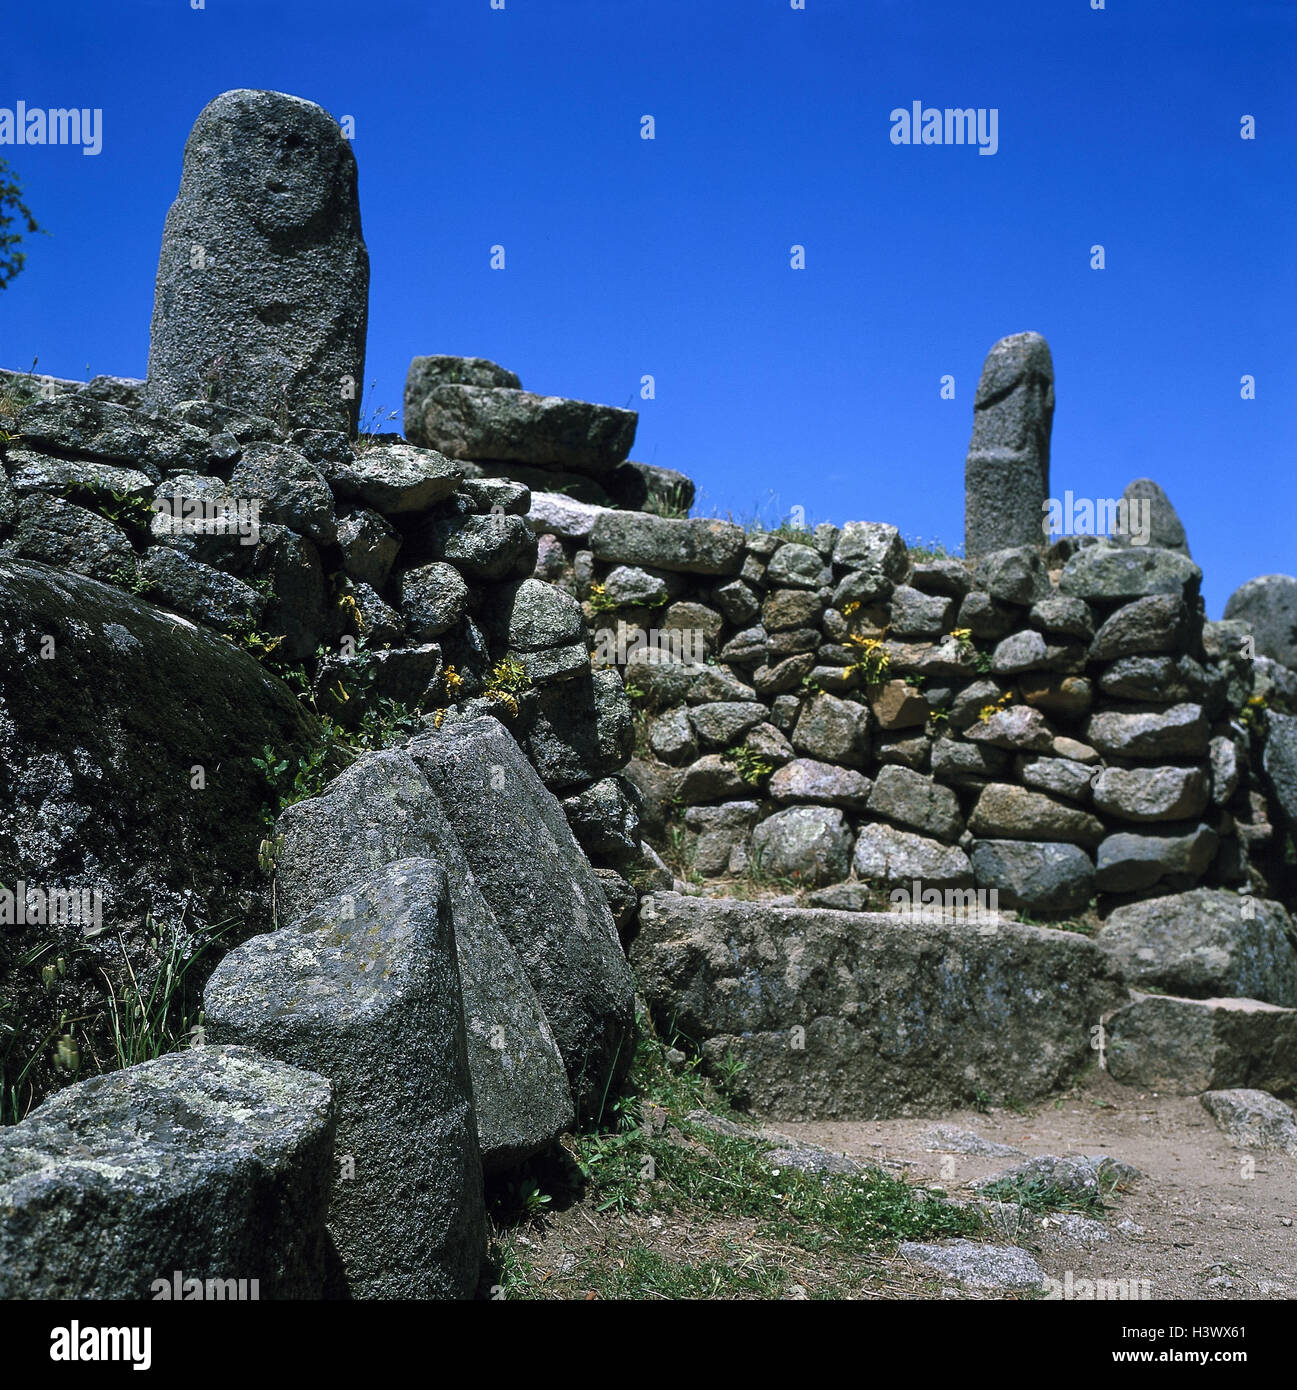 France, island Corsica, Filitosa, stone defensive wall, Menhir-Statuen, island, Mediterranean island, Corsica, Taravo area, prehistoric finding site, menhir statues, megalithic culture, Neolithic Age, place of interest, culture, excavations, archeology, r Stock Photo